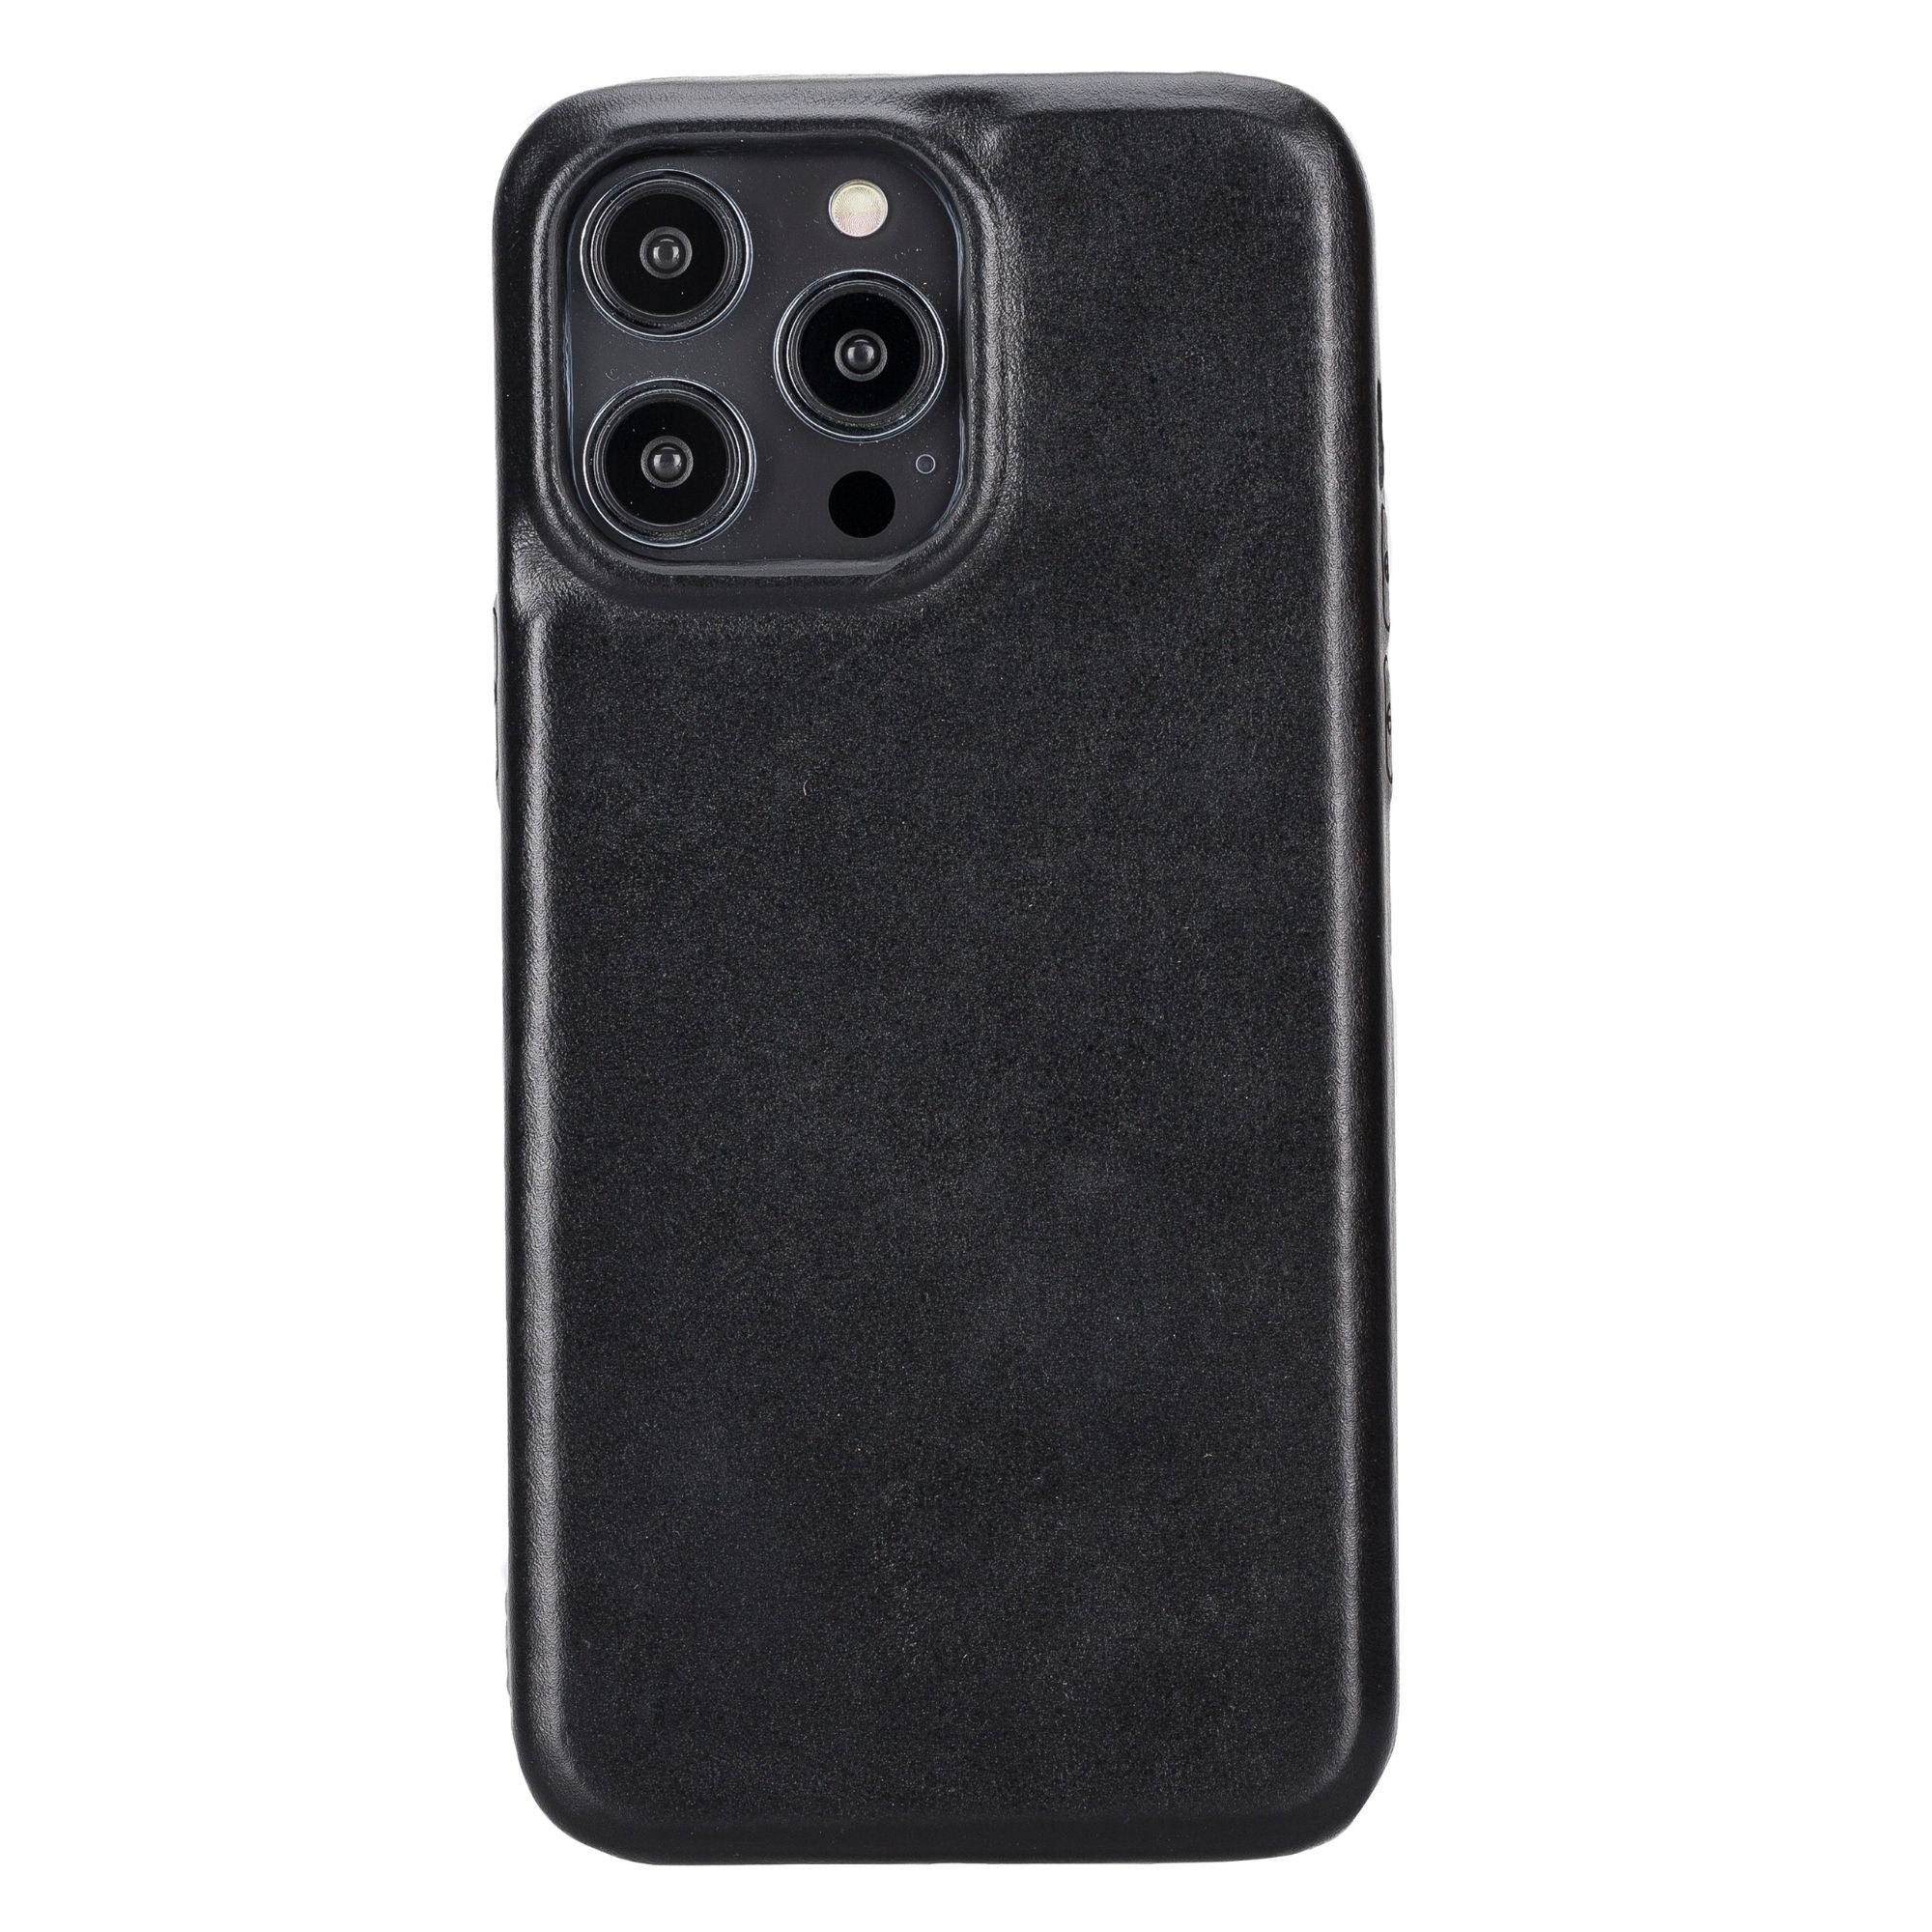 Pinedale Leather Snap-on Case for iPhone 11 Series - iPhone 11 Pro Max - Black - TORONATA